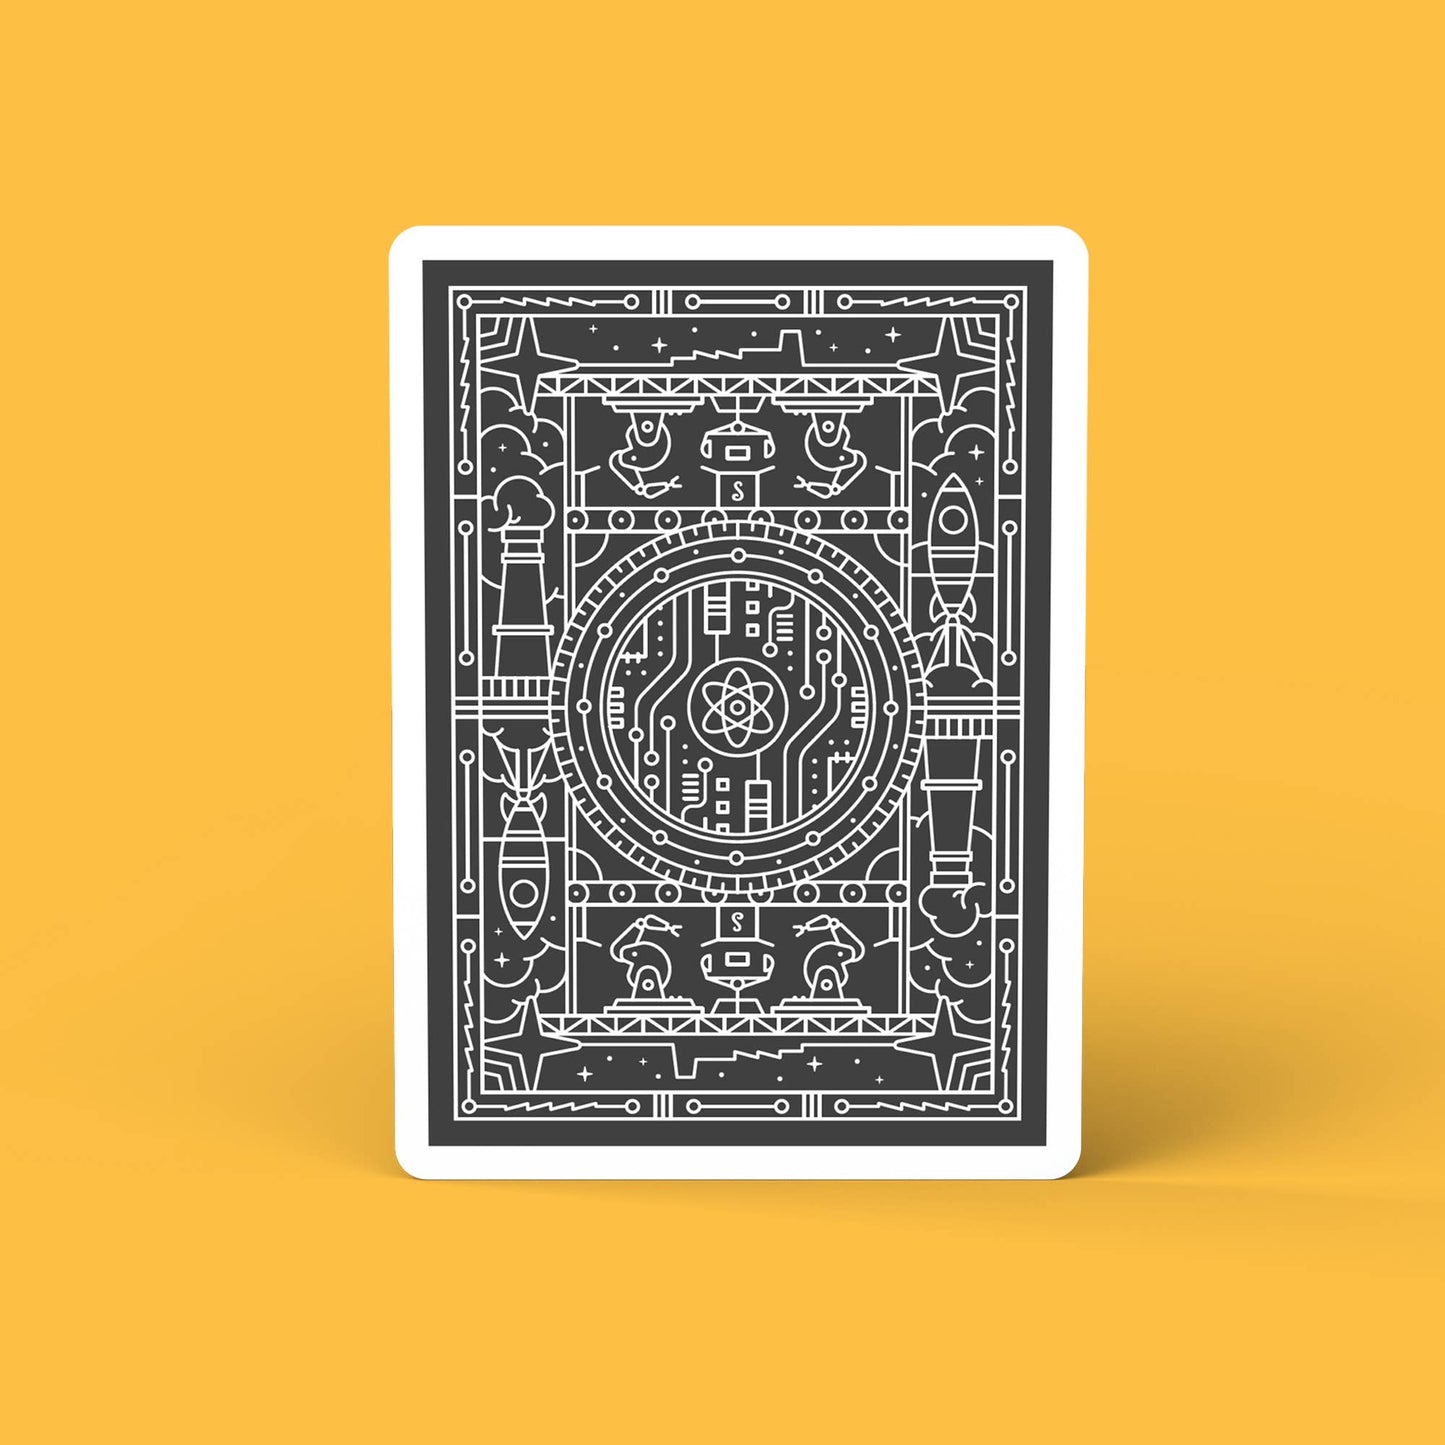 Deck of Robots Playing Card Deck